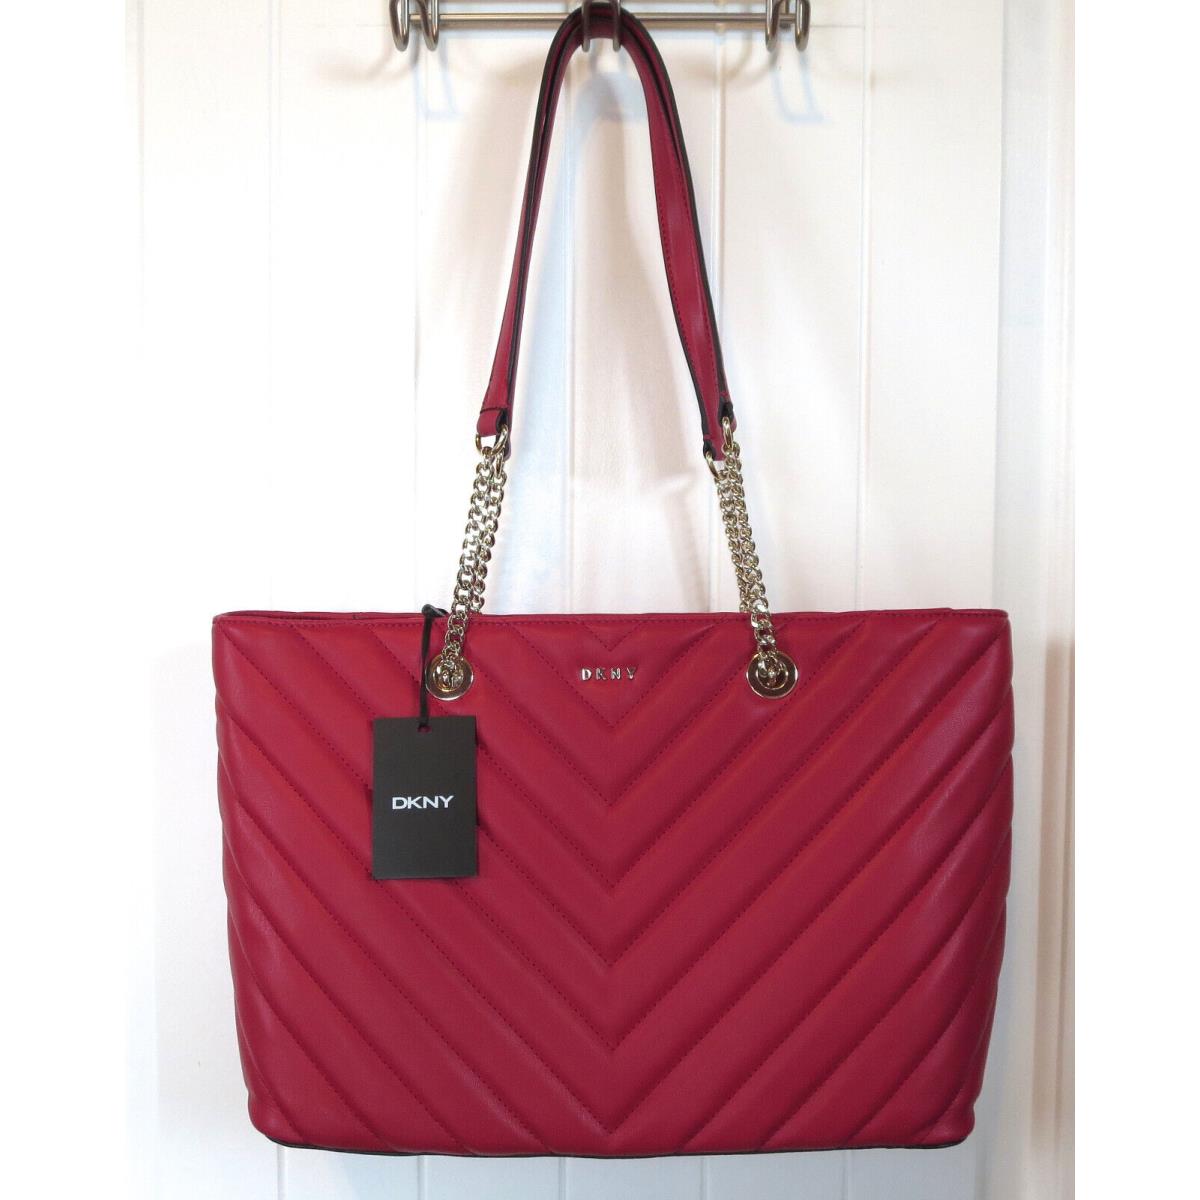 Dkny Veronica Tote Bag Red Quilted Chevron Chain Shoulder Purse Top Zip